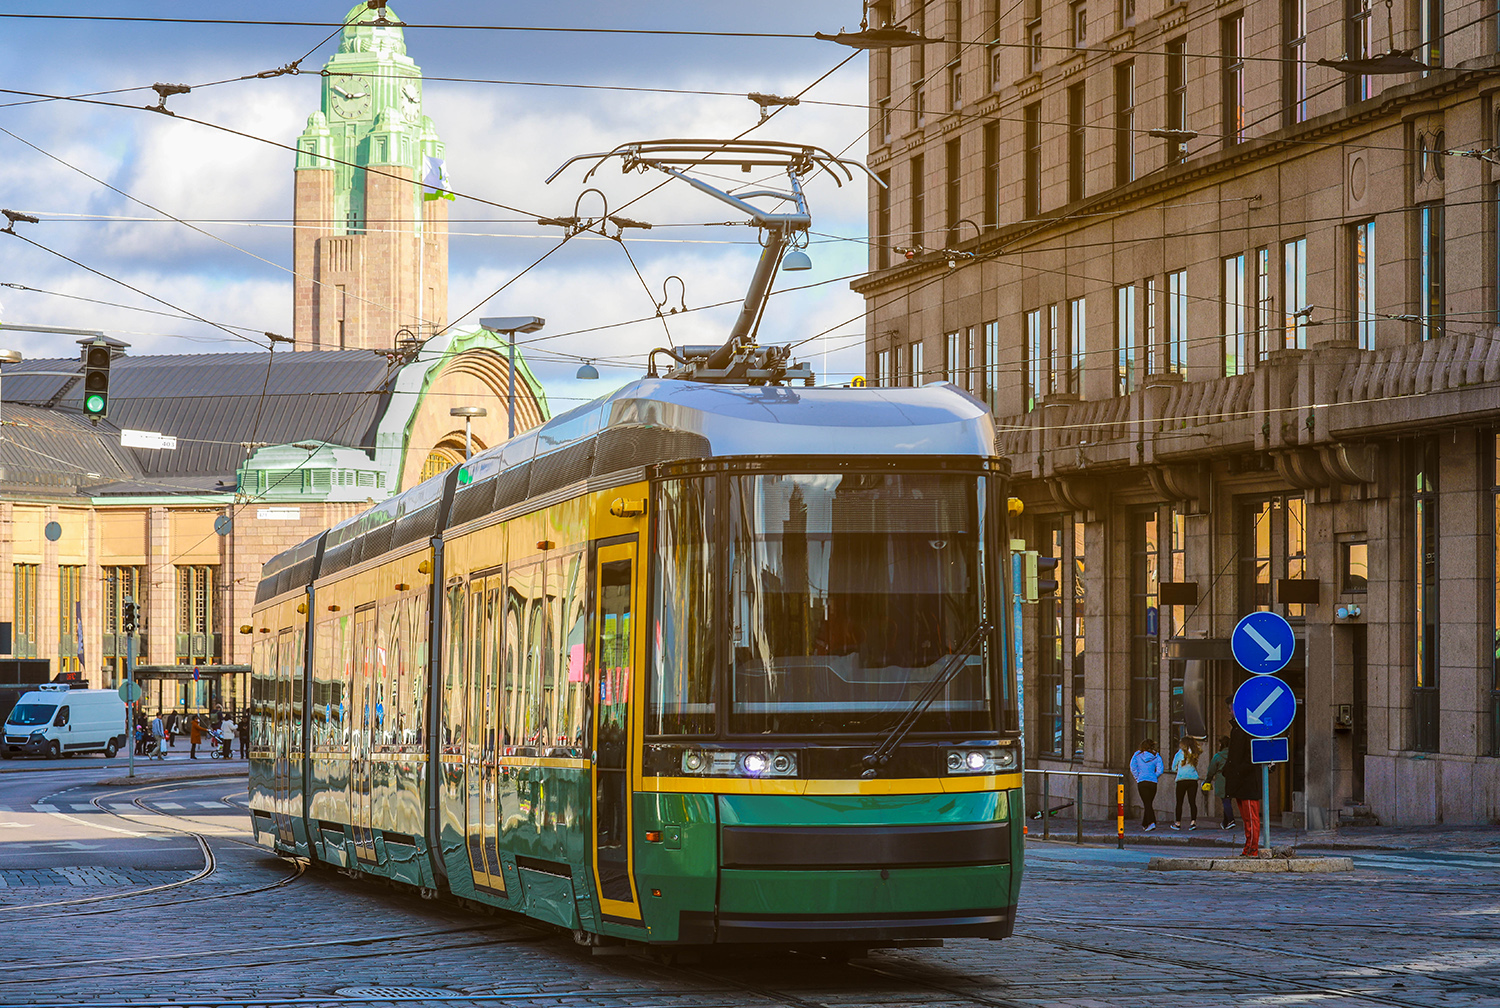 green tram transporting people in the central part of the Helsinki city, Finland